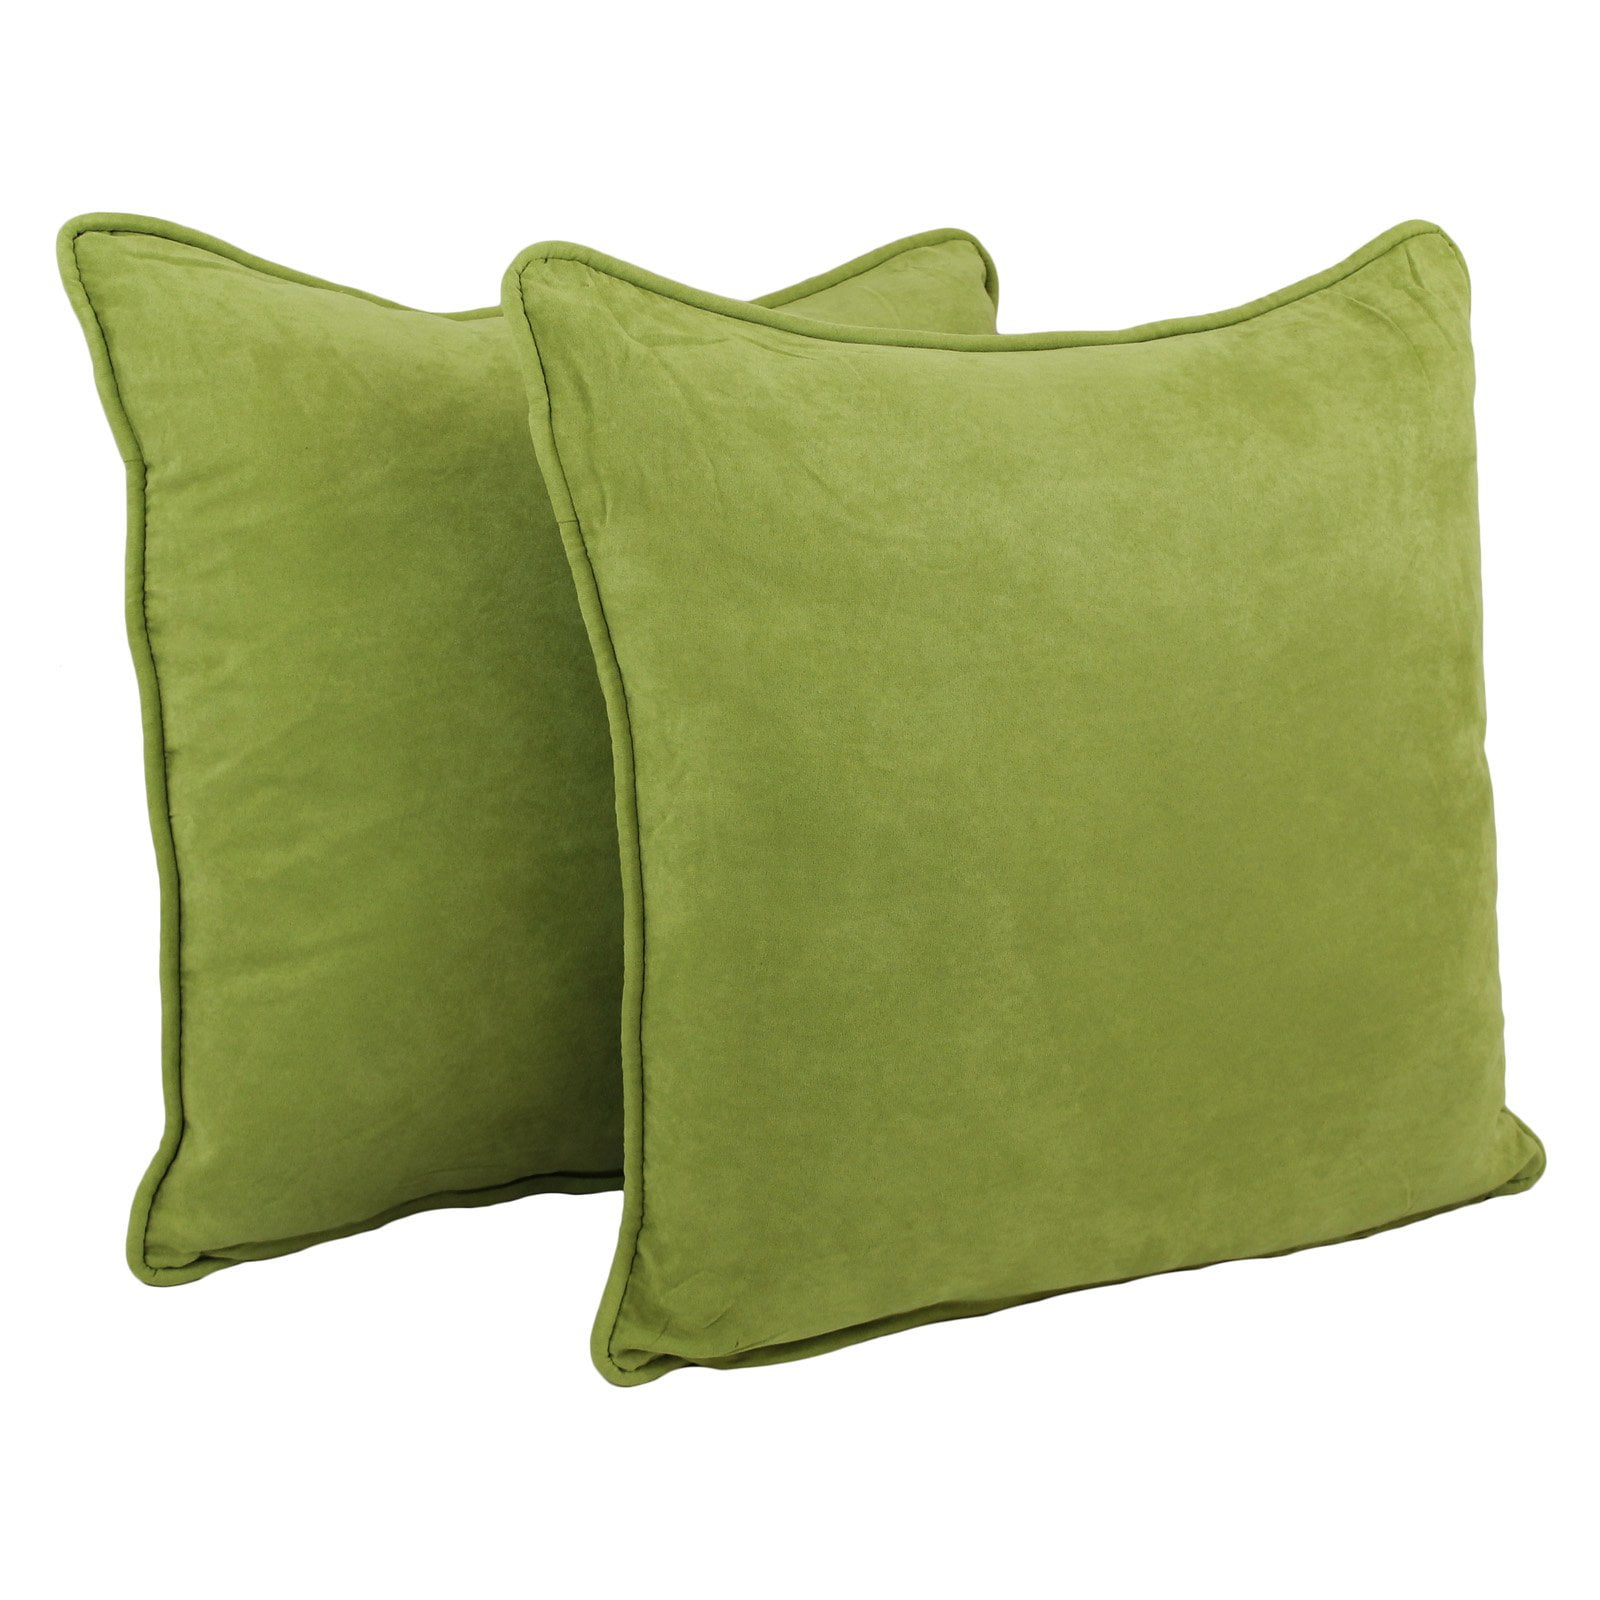 Picture of Blazing Needles 9813-CD-S2-MS-ML 25 in. Double-Corded Solid Microsuede Square Floor Pillows with Inserts, Mojito Lime - Set of 2